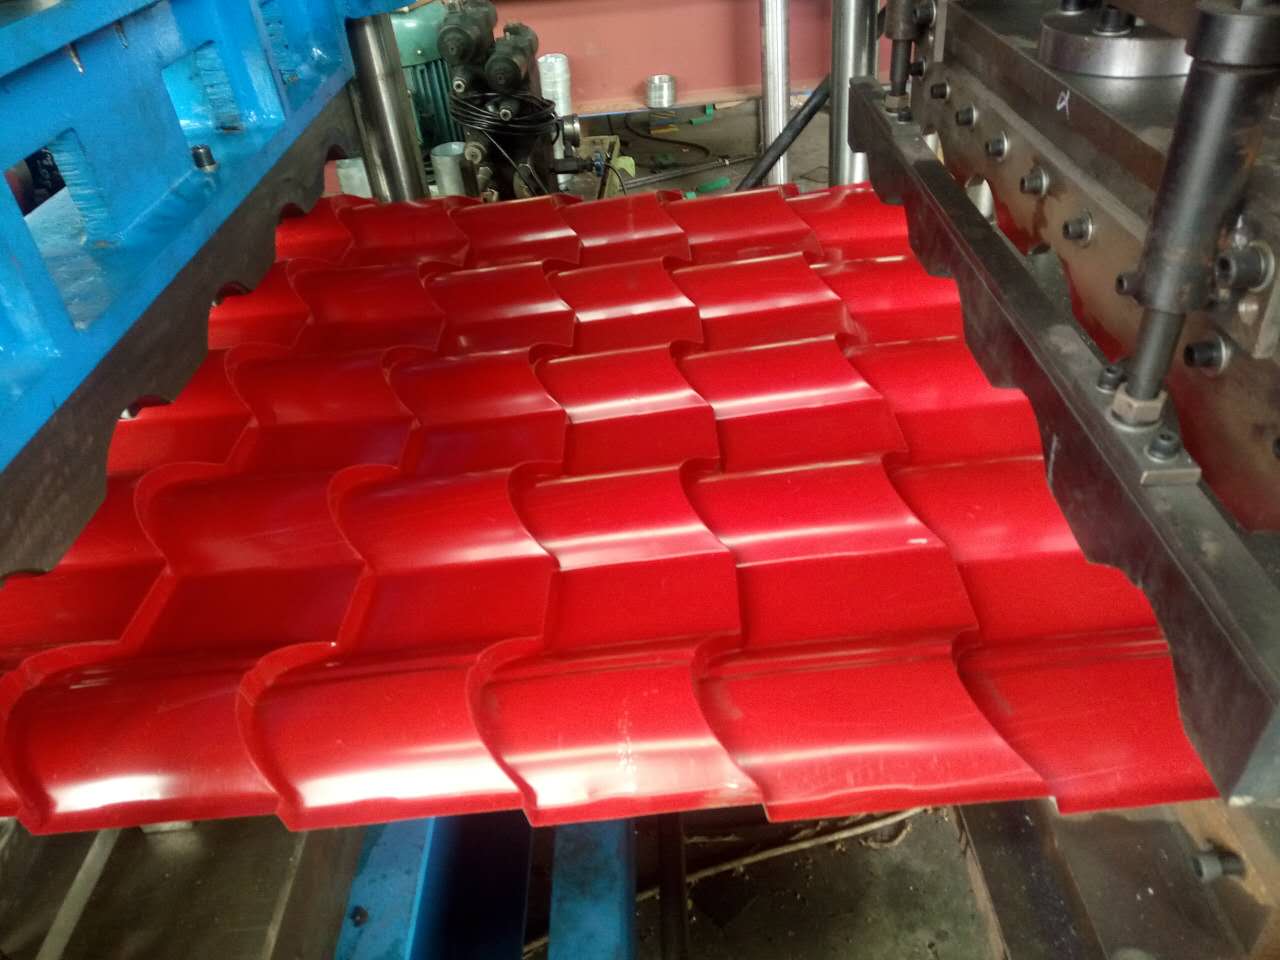 Glazed tile roof sheet roll forming machine